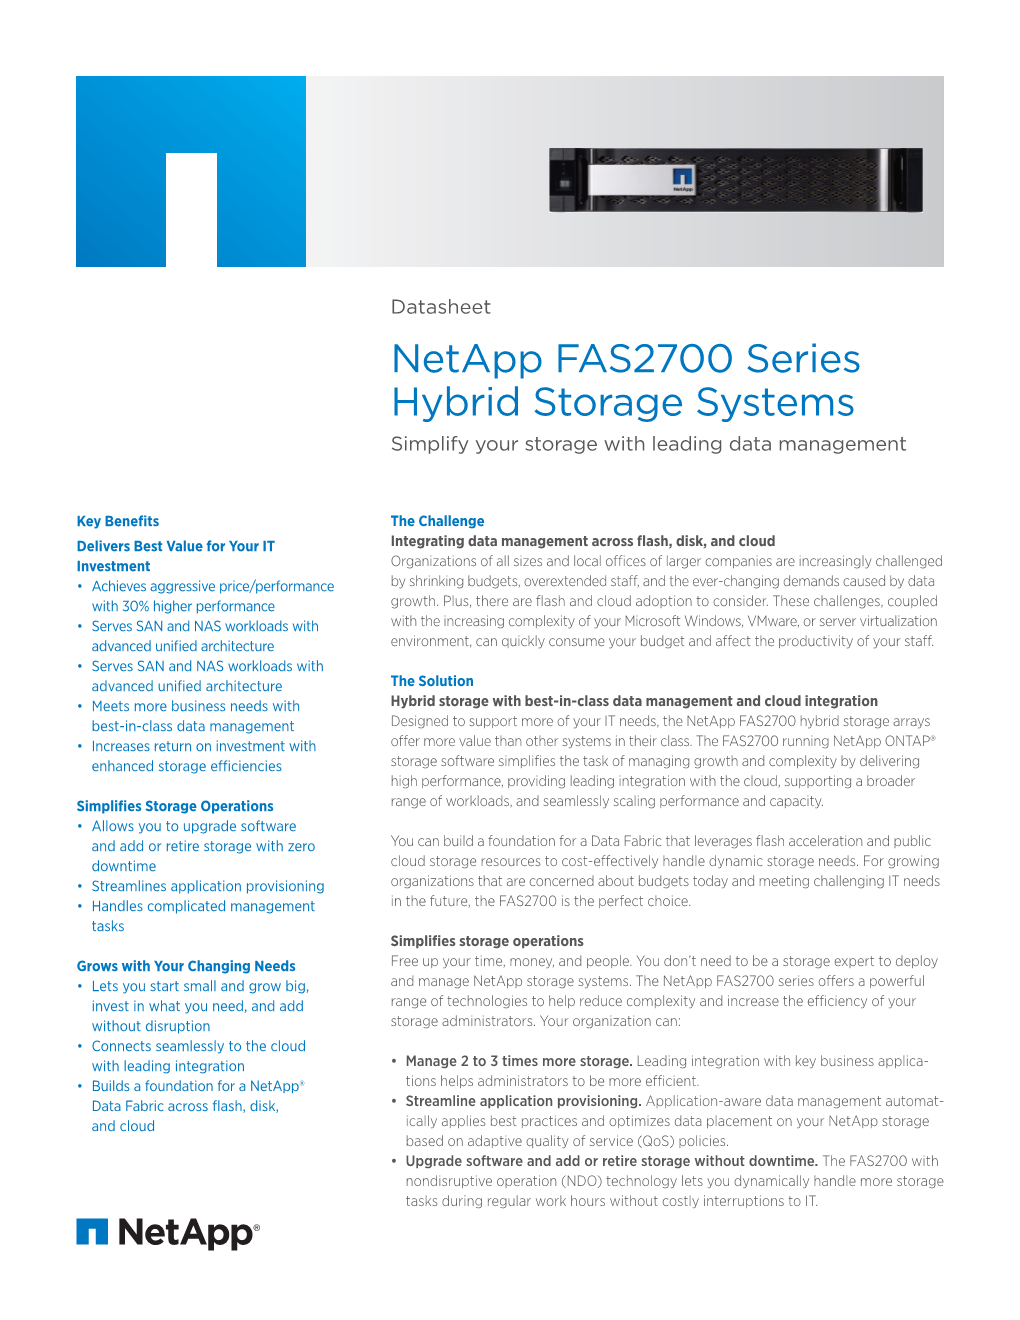 Netapp FAS2700 Series Hybrid Storage Systems Simplify Your Storage with Leading Data Management